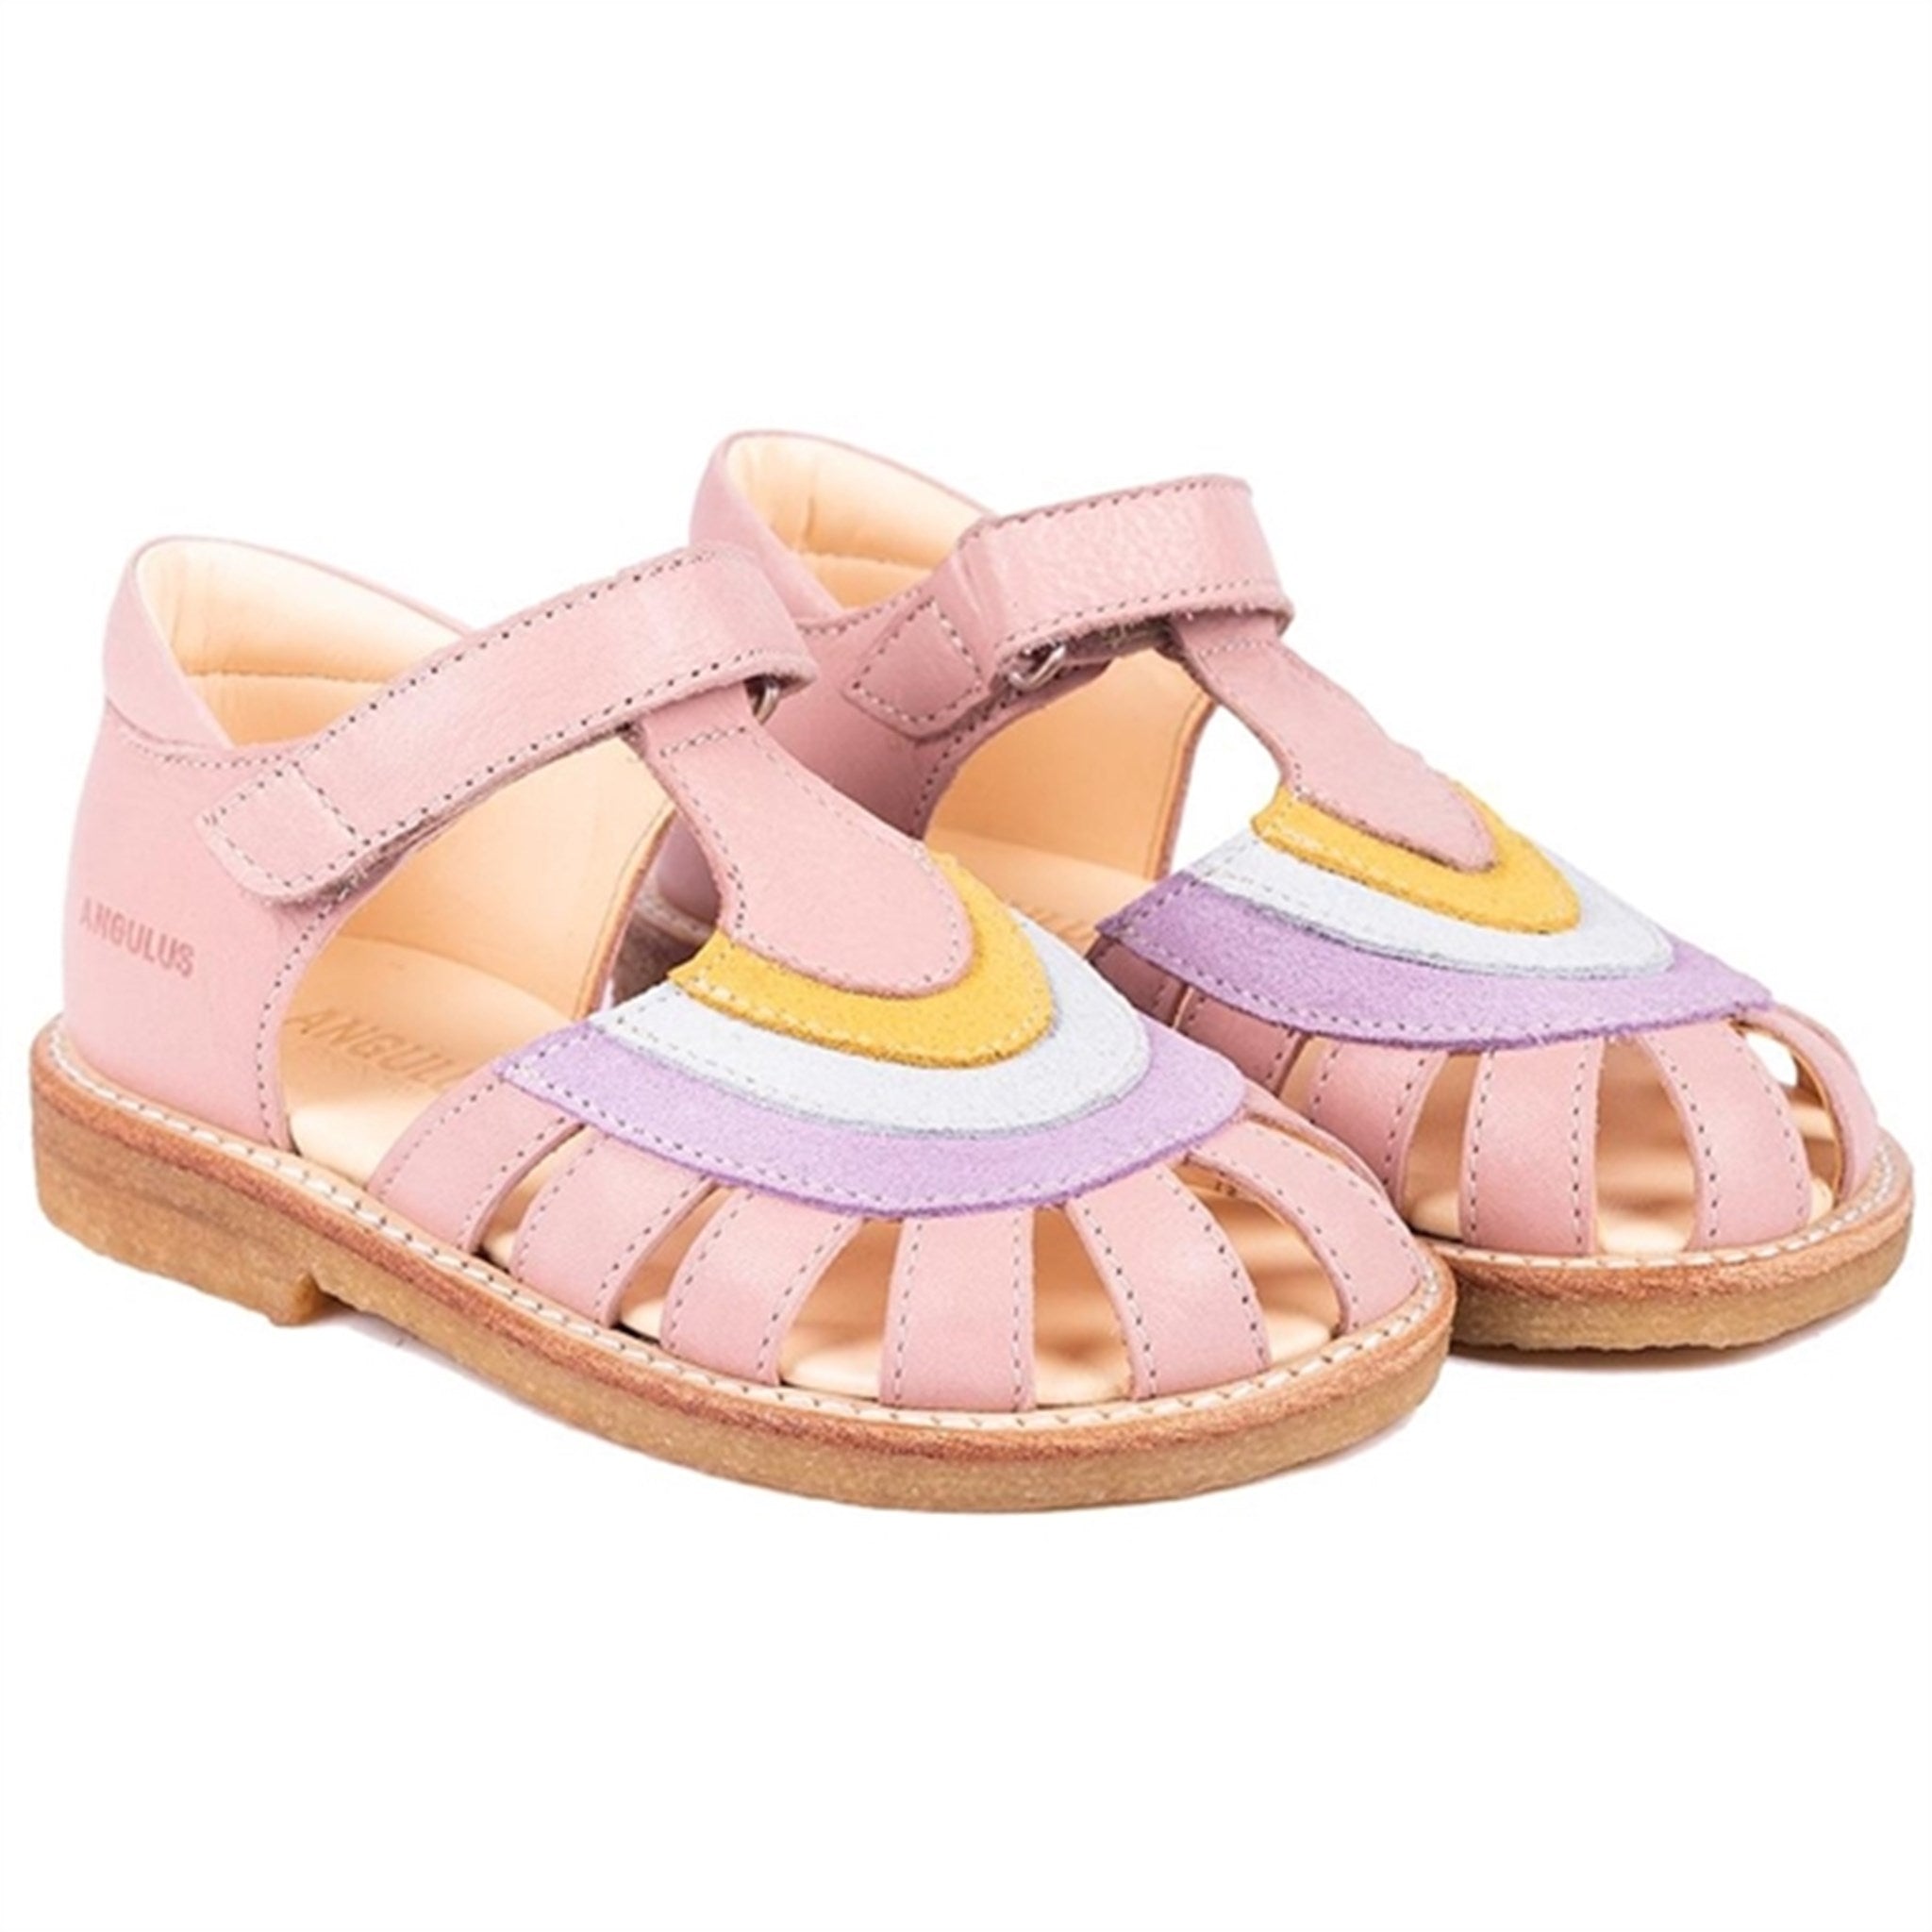 Angulus Sandals Rose/Lilac/Ice Blue/Pineapple